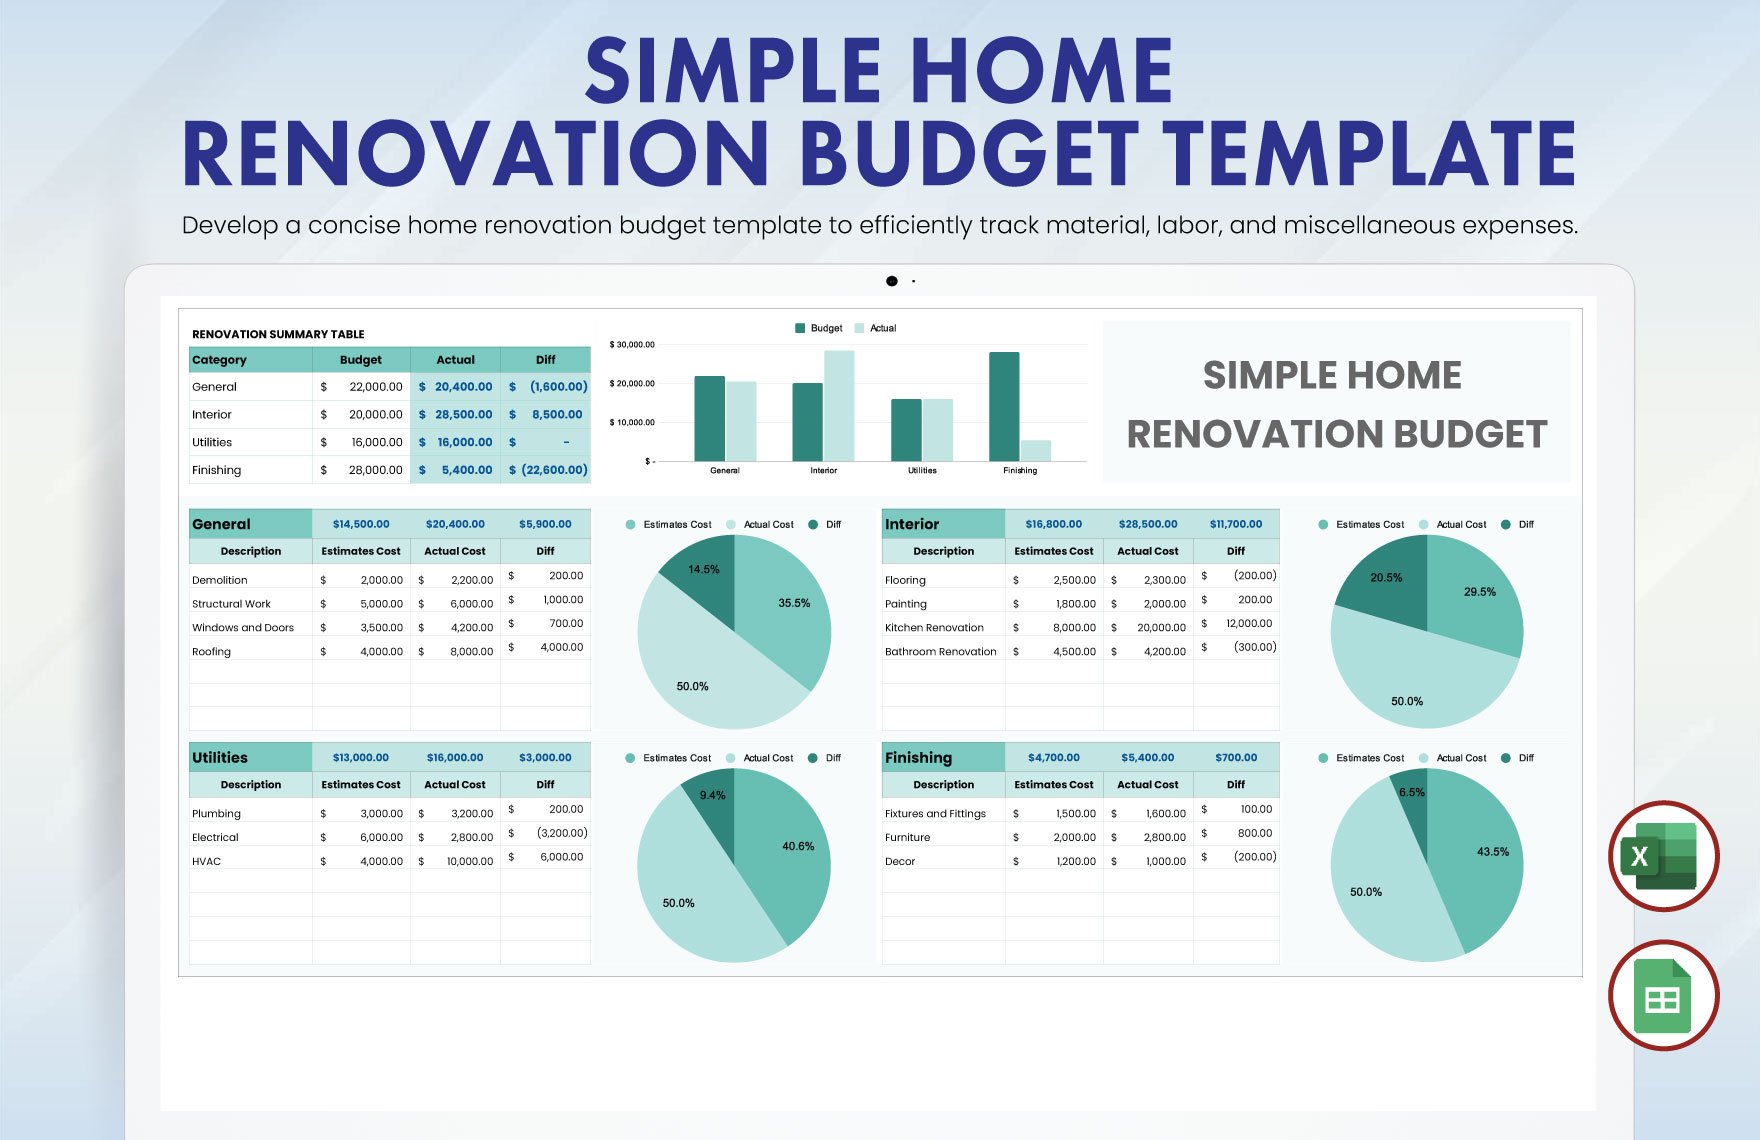 Free Simple Home Renovation Budget Template in Excel, Google Sheets